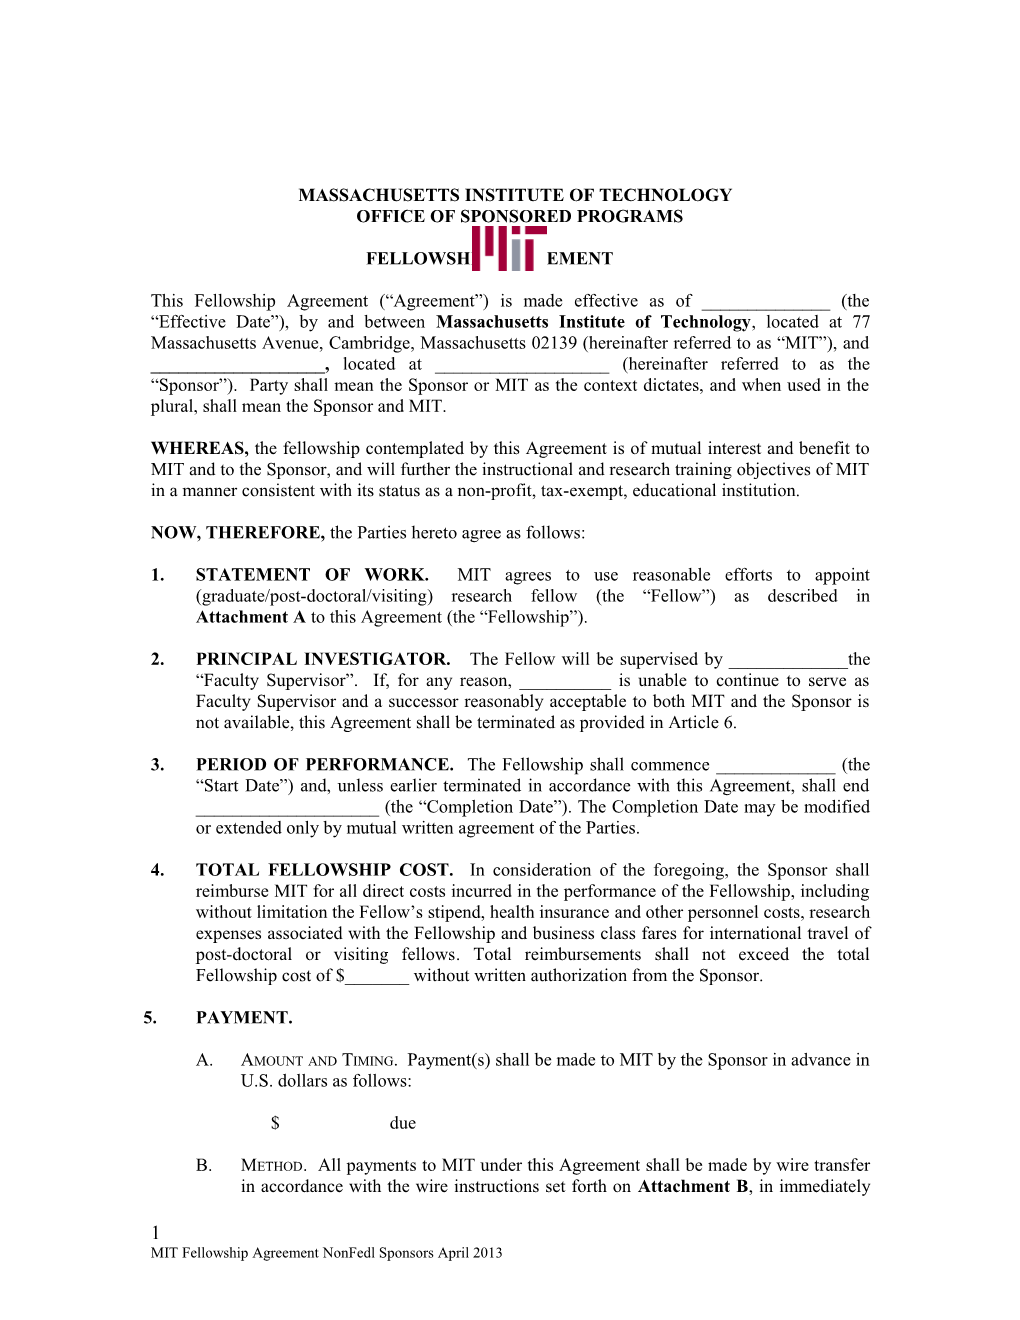 MIT FELLOWSHIP AGREEMENT for Nonfed-Sponsors-2015-04-27